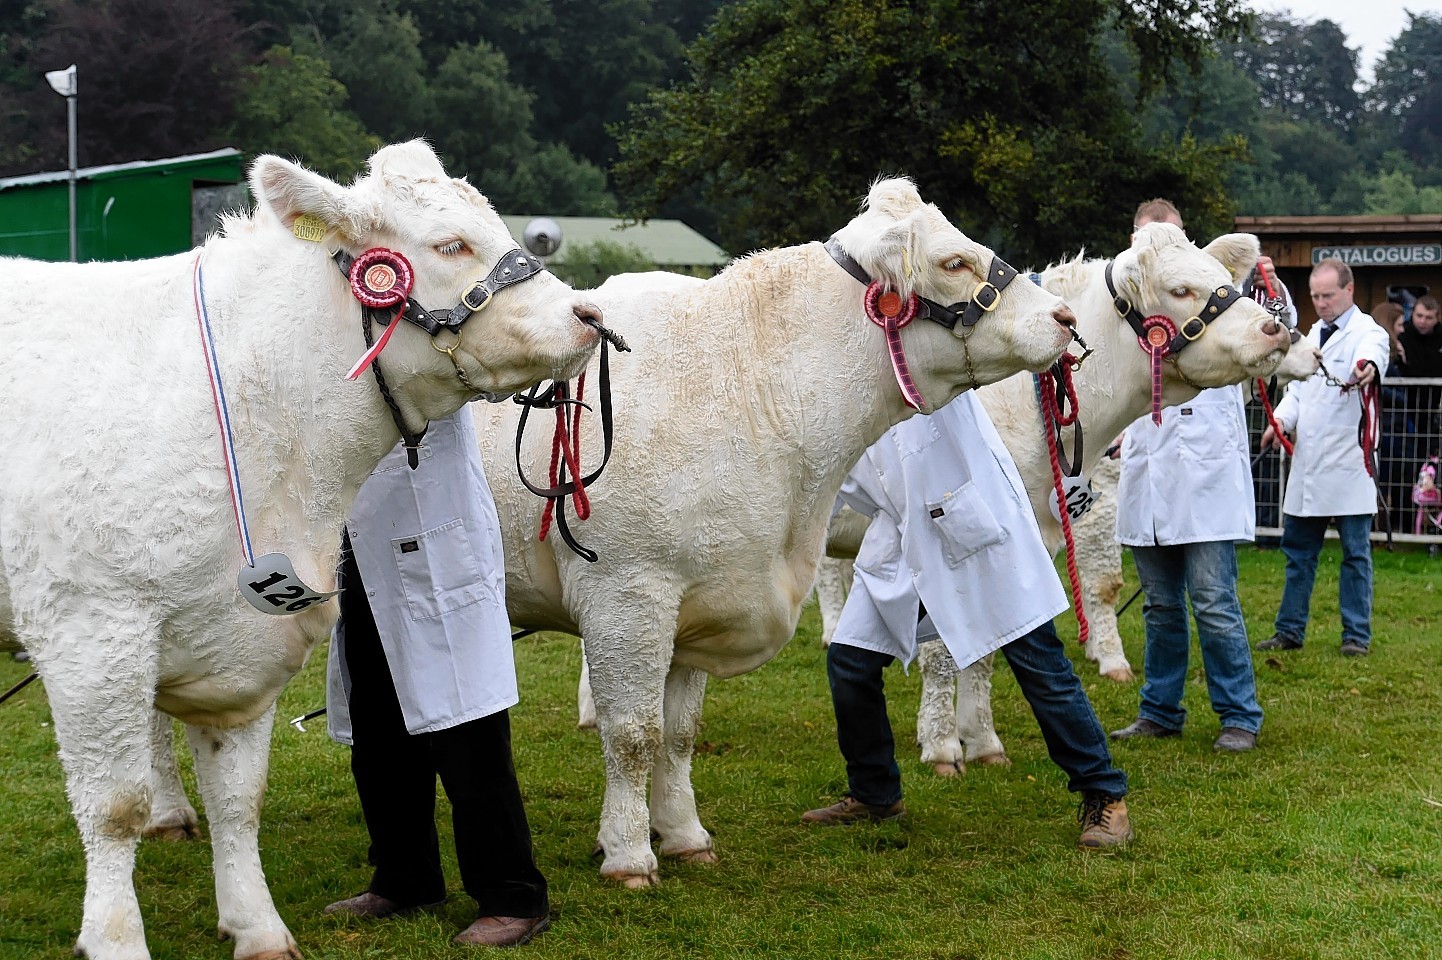 NFUS has invited MEPs to attend an agricultural show this summer